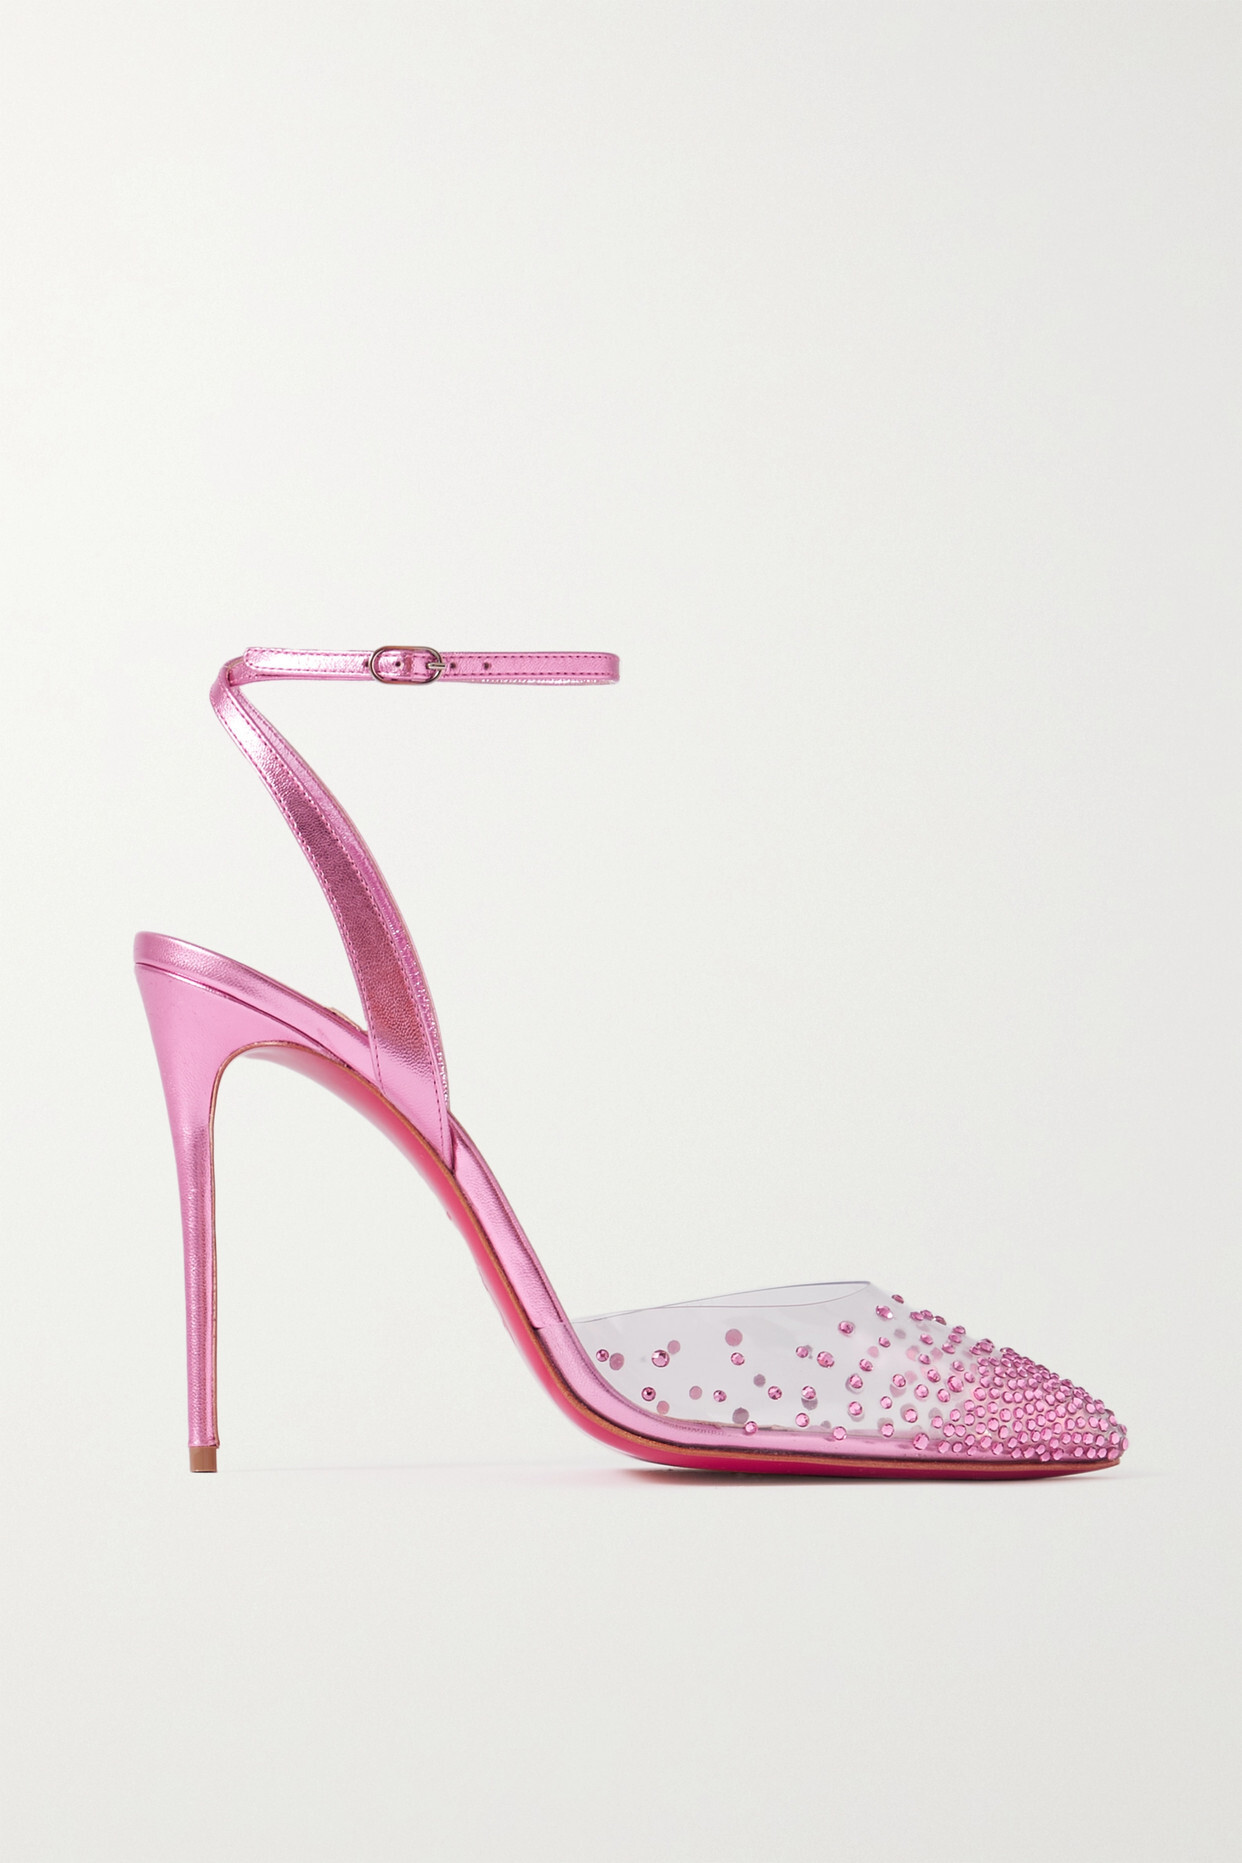 Christian Louboutin - Spikaqueen 100 Crystal-embellished Pvc And Metallic-leather Pumps - Pink